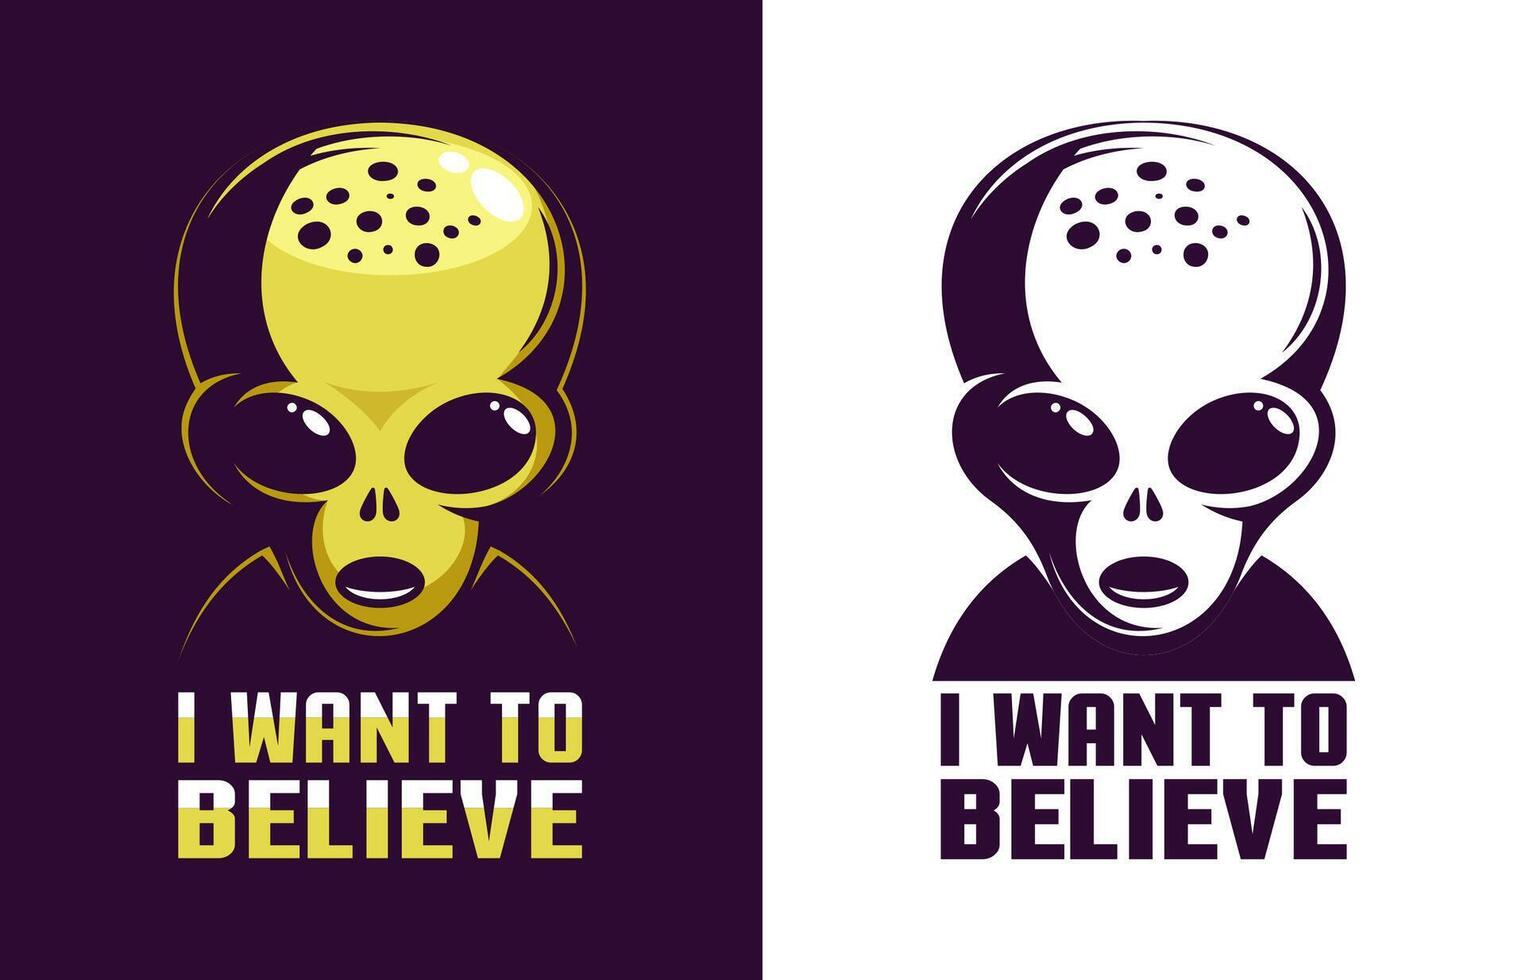 Alien head retro logo with the inscription I want to believe. Extraterrestrial life emblem. illustration. vector